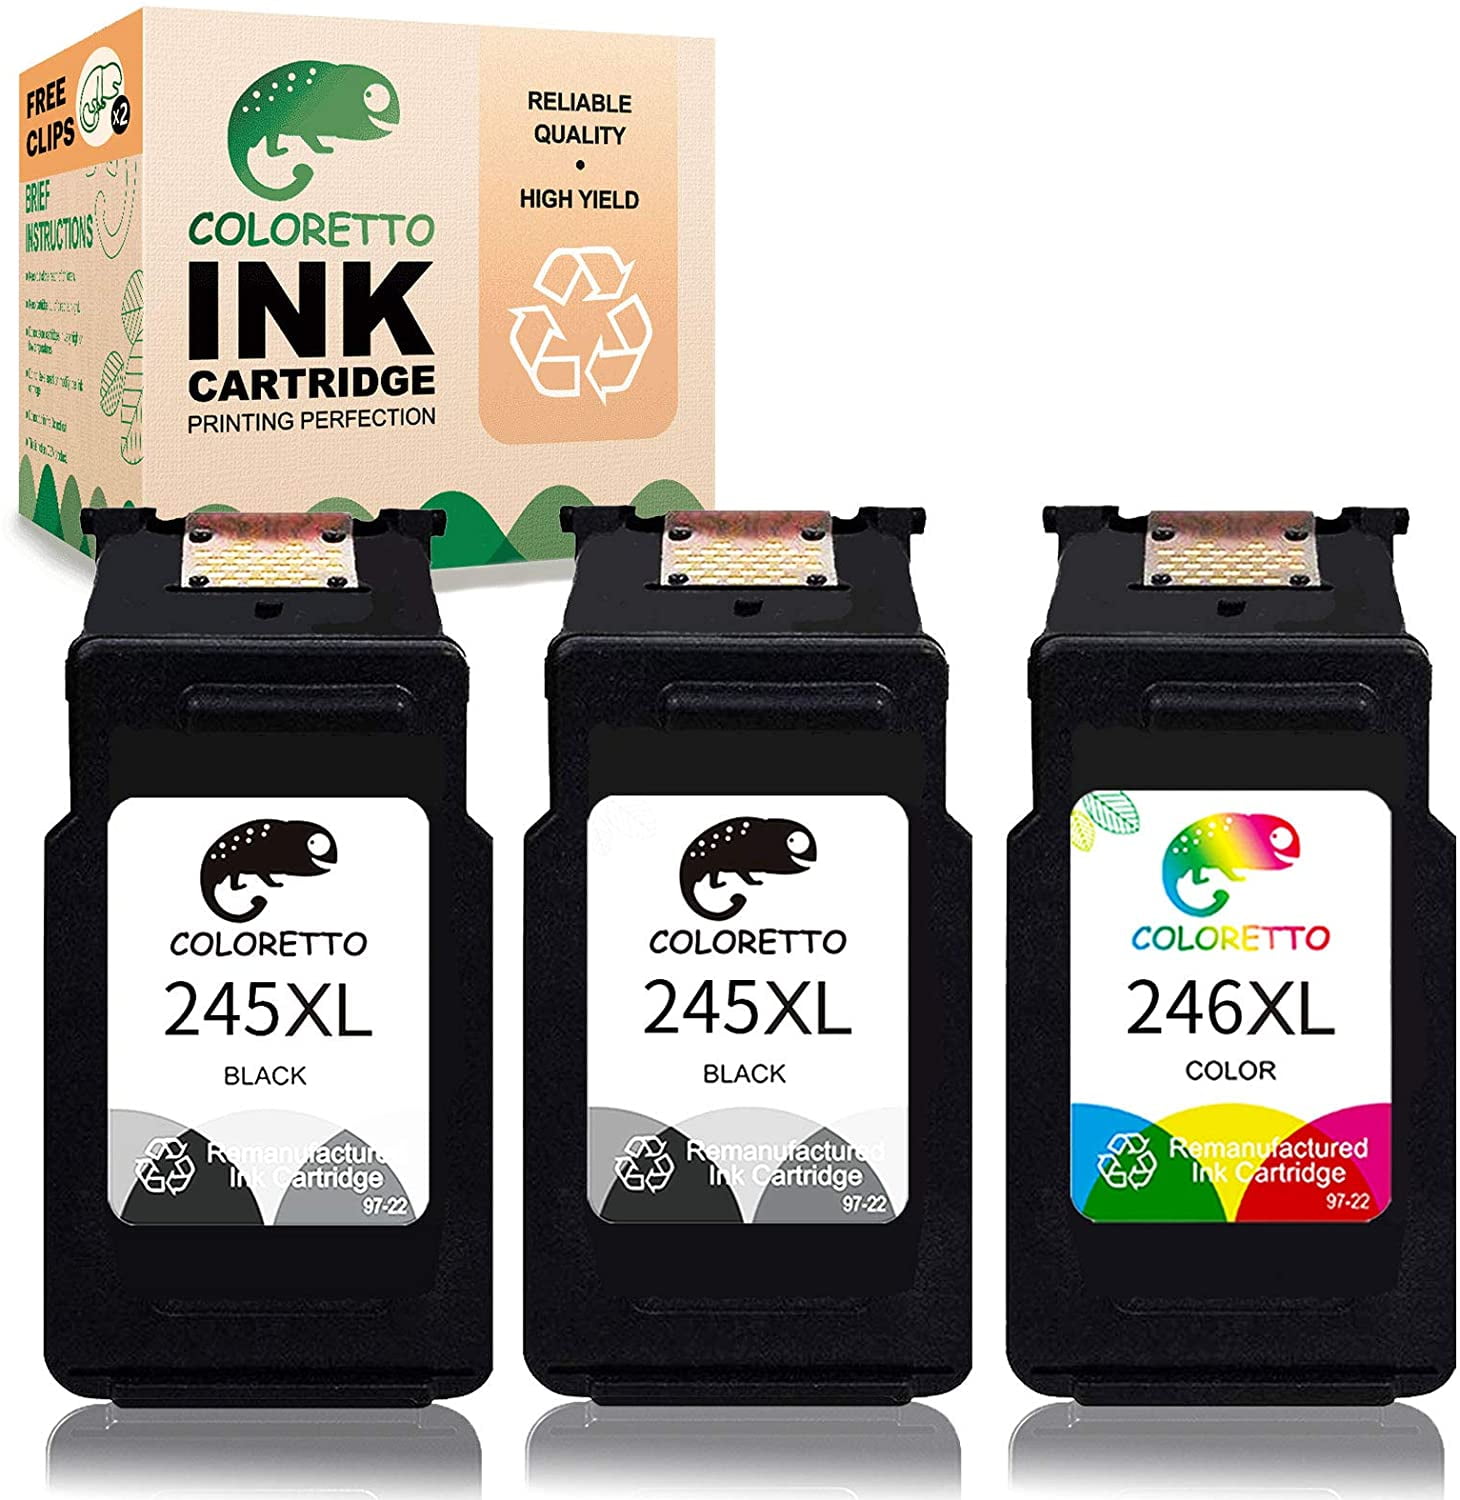 2-Pack Pitooler Remanufactured Ink Cartridge Replacement for Canon PG-245 CL-246 245 246 PG-243 CL-244 Black Color Use with Pixma MG3022 MG2522 TR4520 TR4522 MG2922 MG2920 TS202 MX492 MX490 Printer